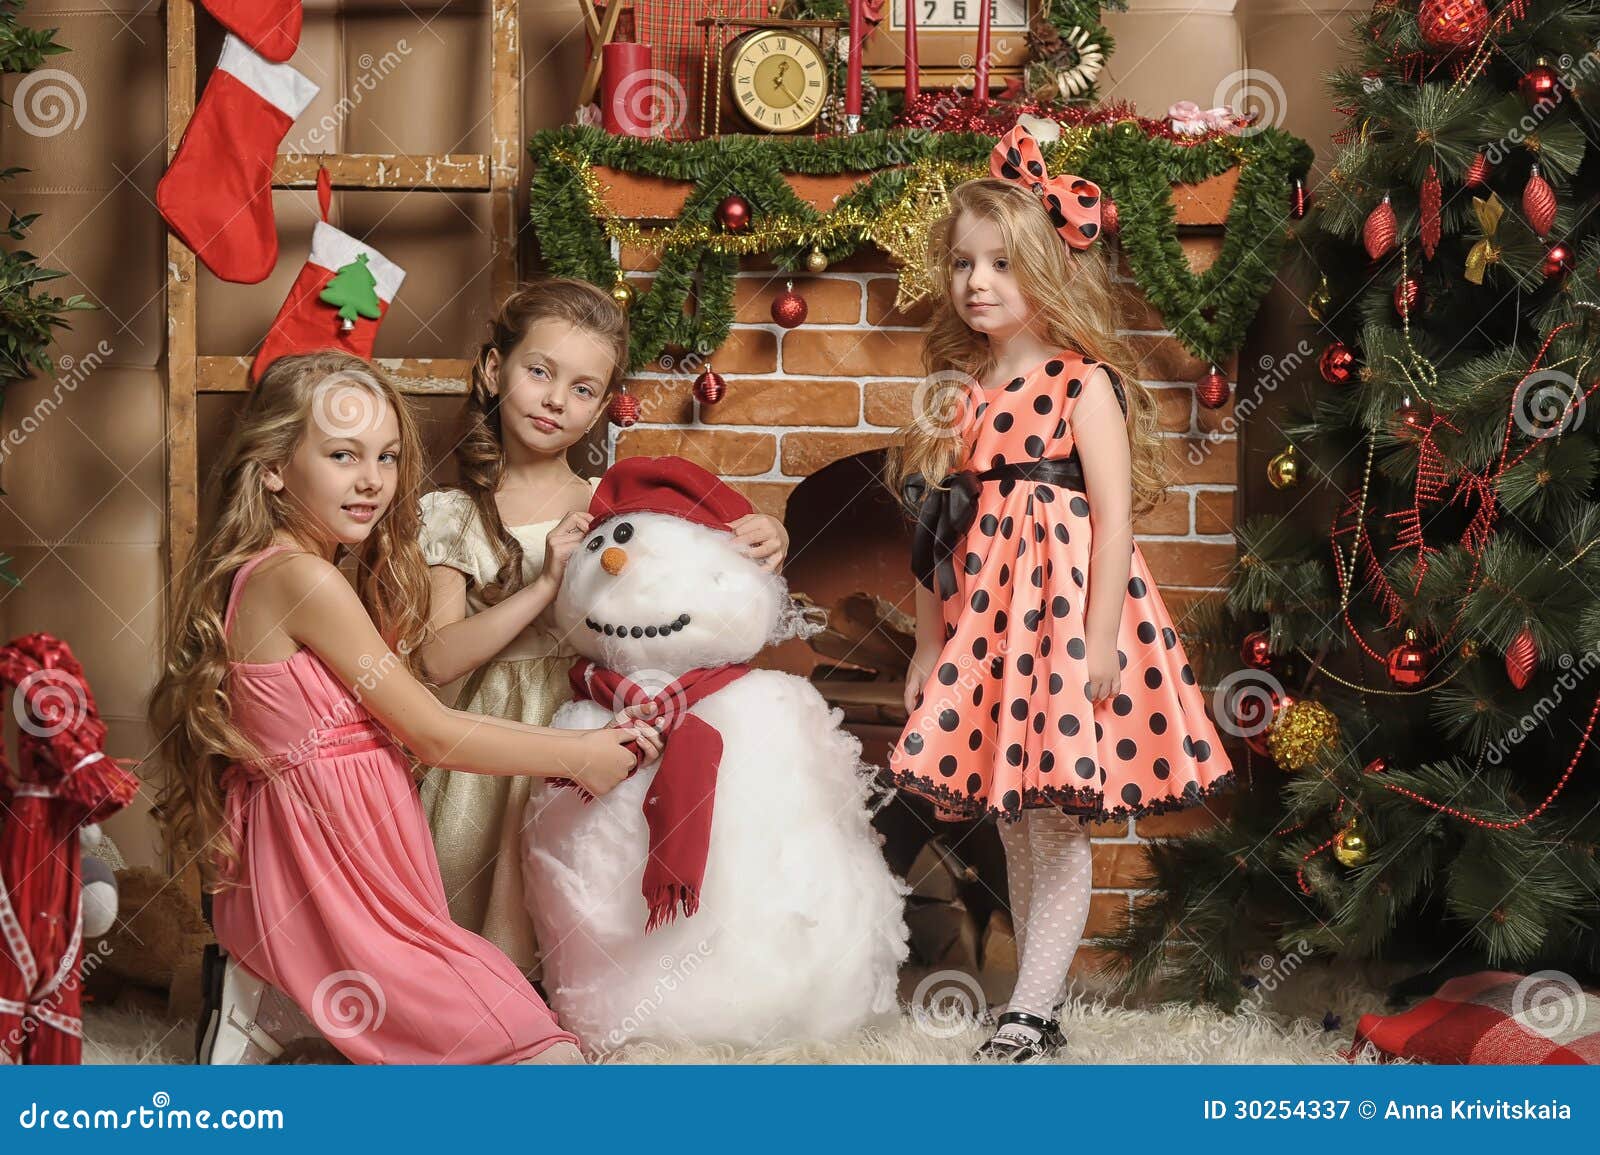 Download Three Cute Girls Waiting For Christmas Stock Image Image of t fireplace